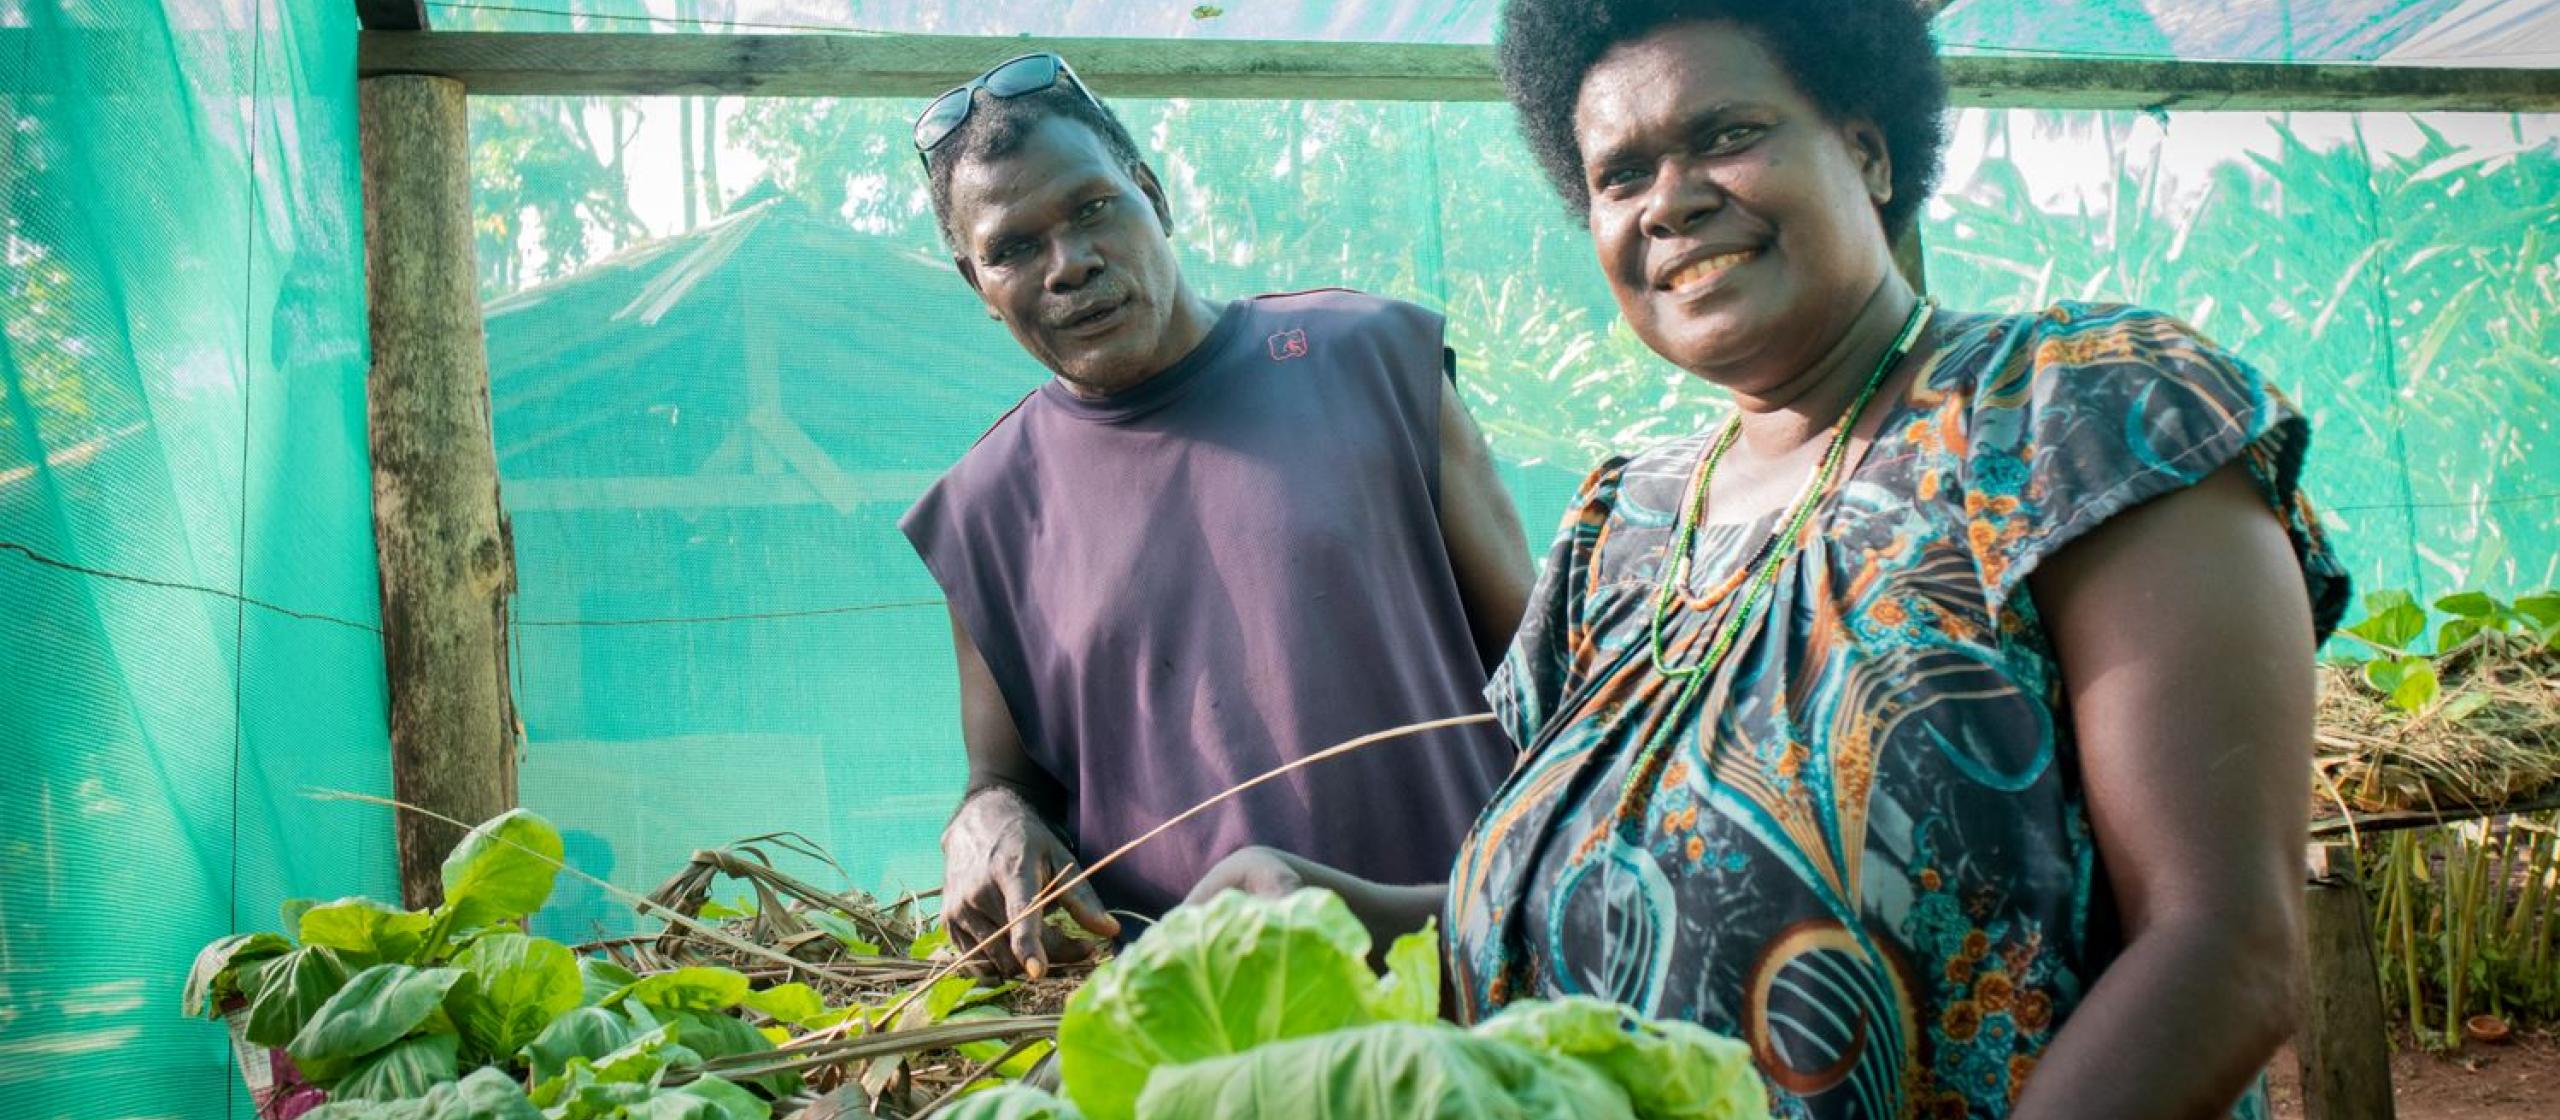 Bougainville farmers Martin and Celestine Masen, showing off their fresh produce. The husband and wife team have undergone the Family Farm Teams training as part of the Bougainville cocoa value chain project. The training is both improving livelihoods for farming families and addressing gender inequalities. It is also flexible enough to be applied across diverse crops, commodities and communities.